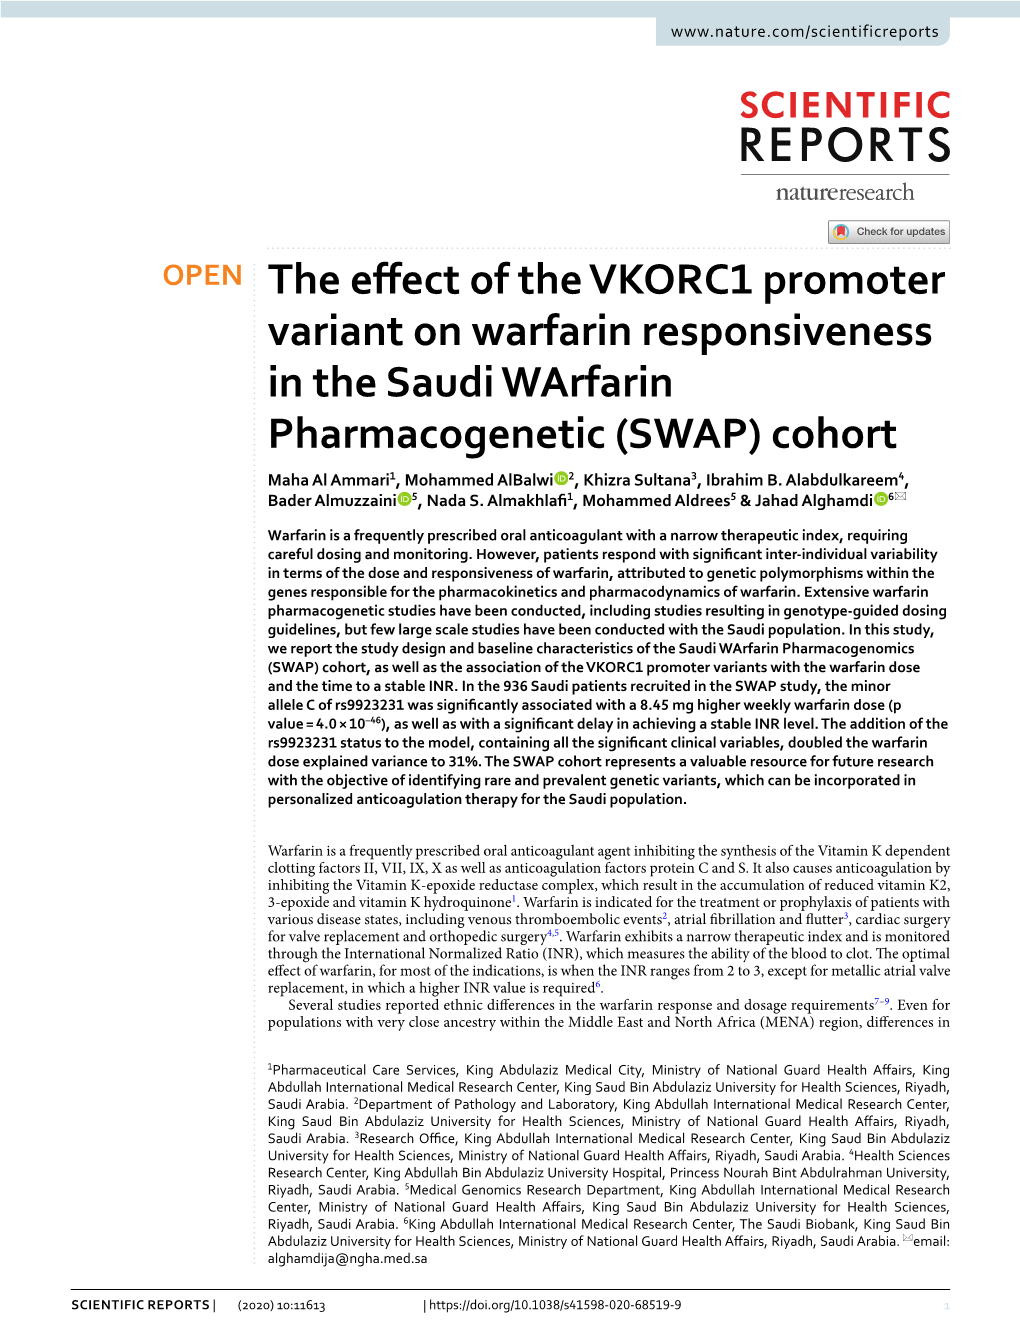 The Effect of the VKORC1 Promoter Variant on Warfarin Responsiveness